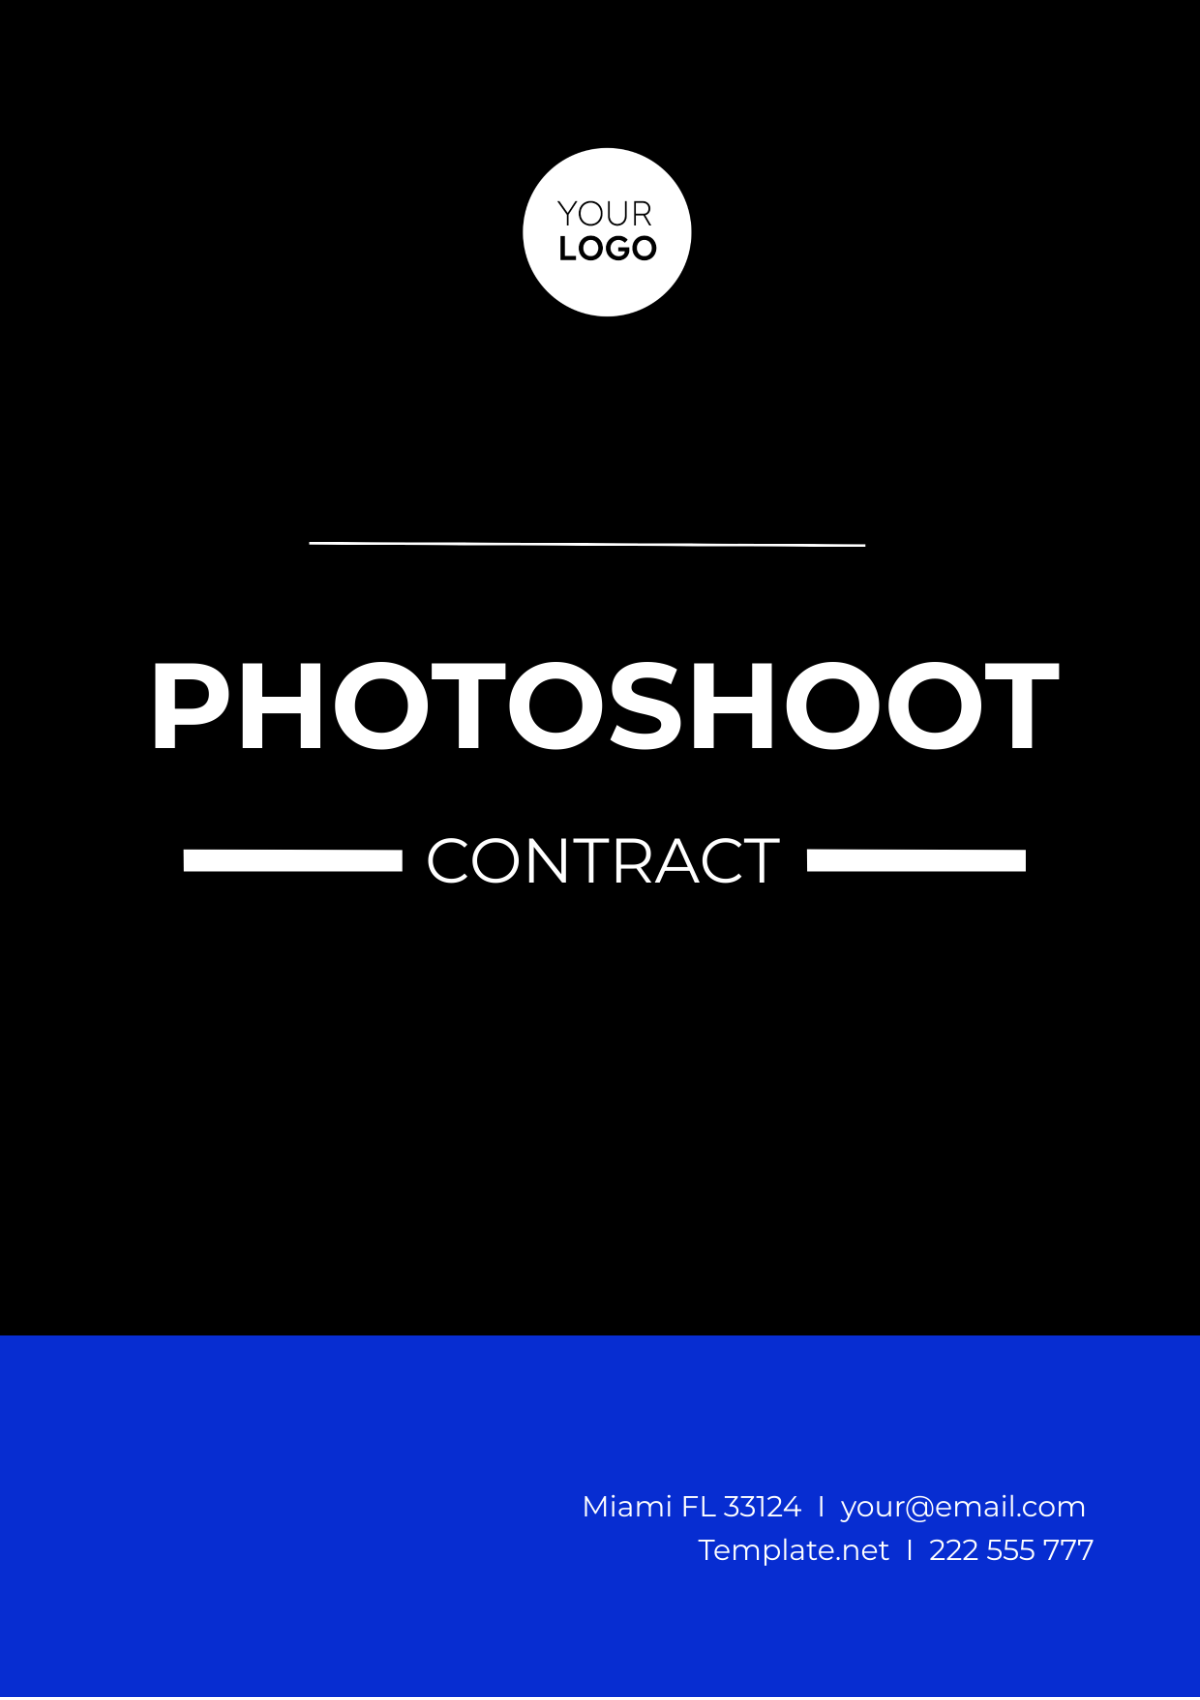 Free Photoshoot Contract Template